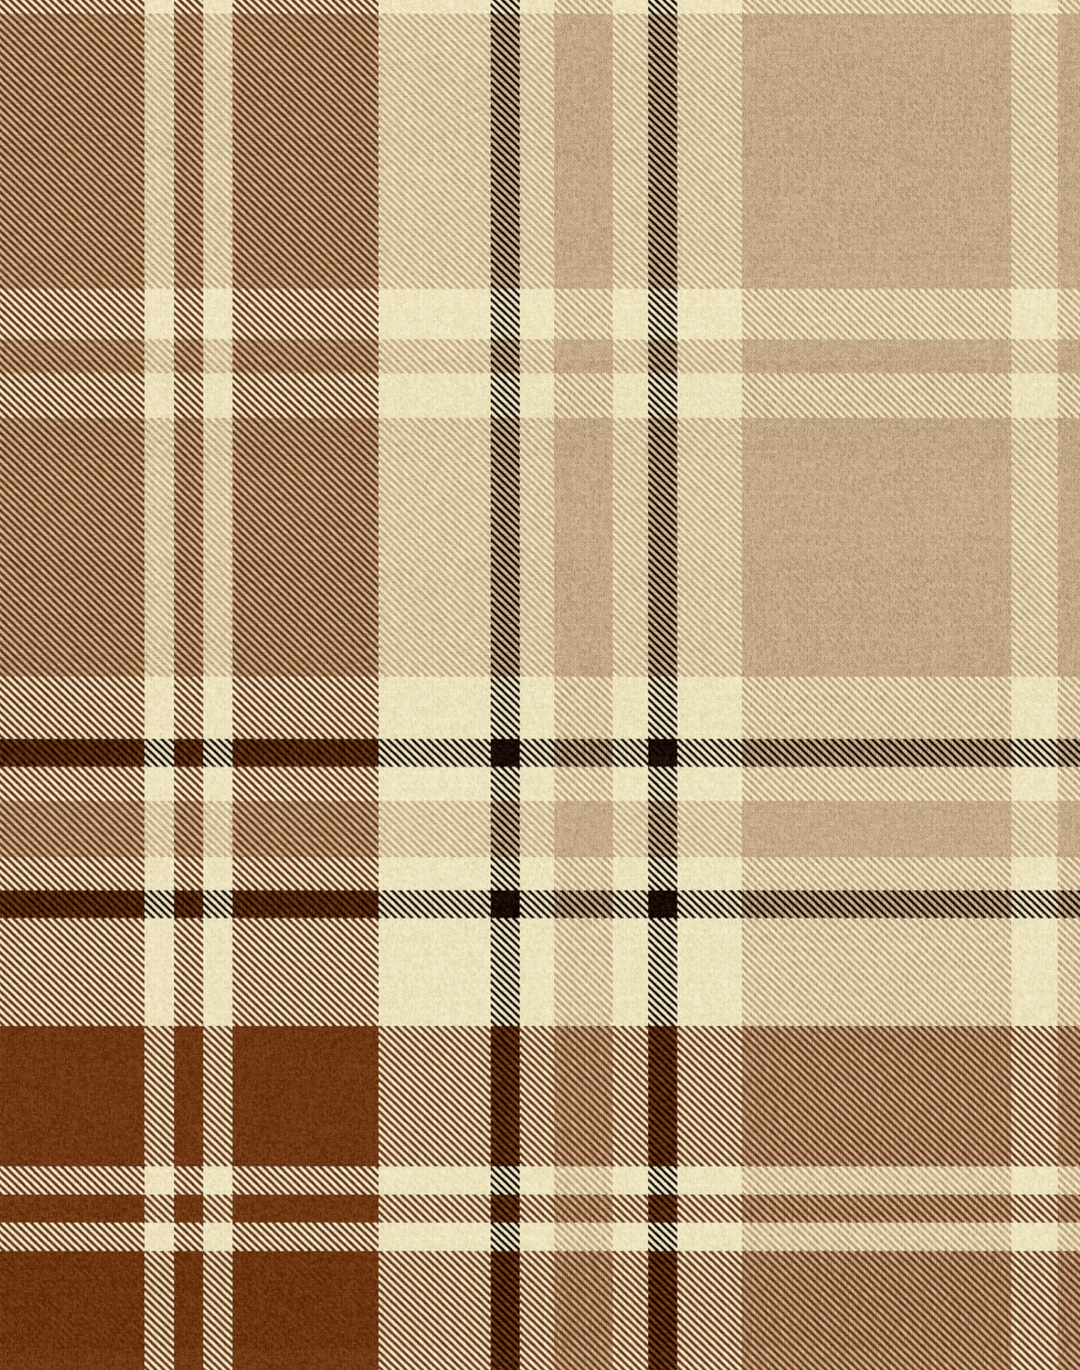 Chesterfield Plaid, Cappuccino